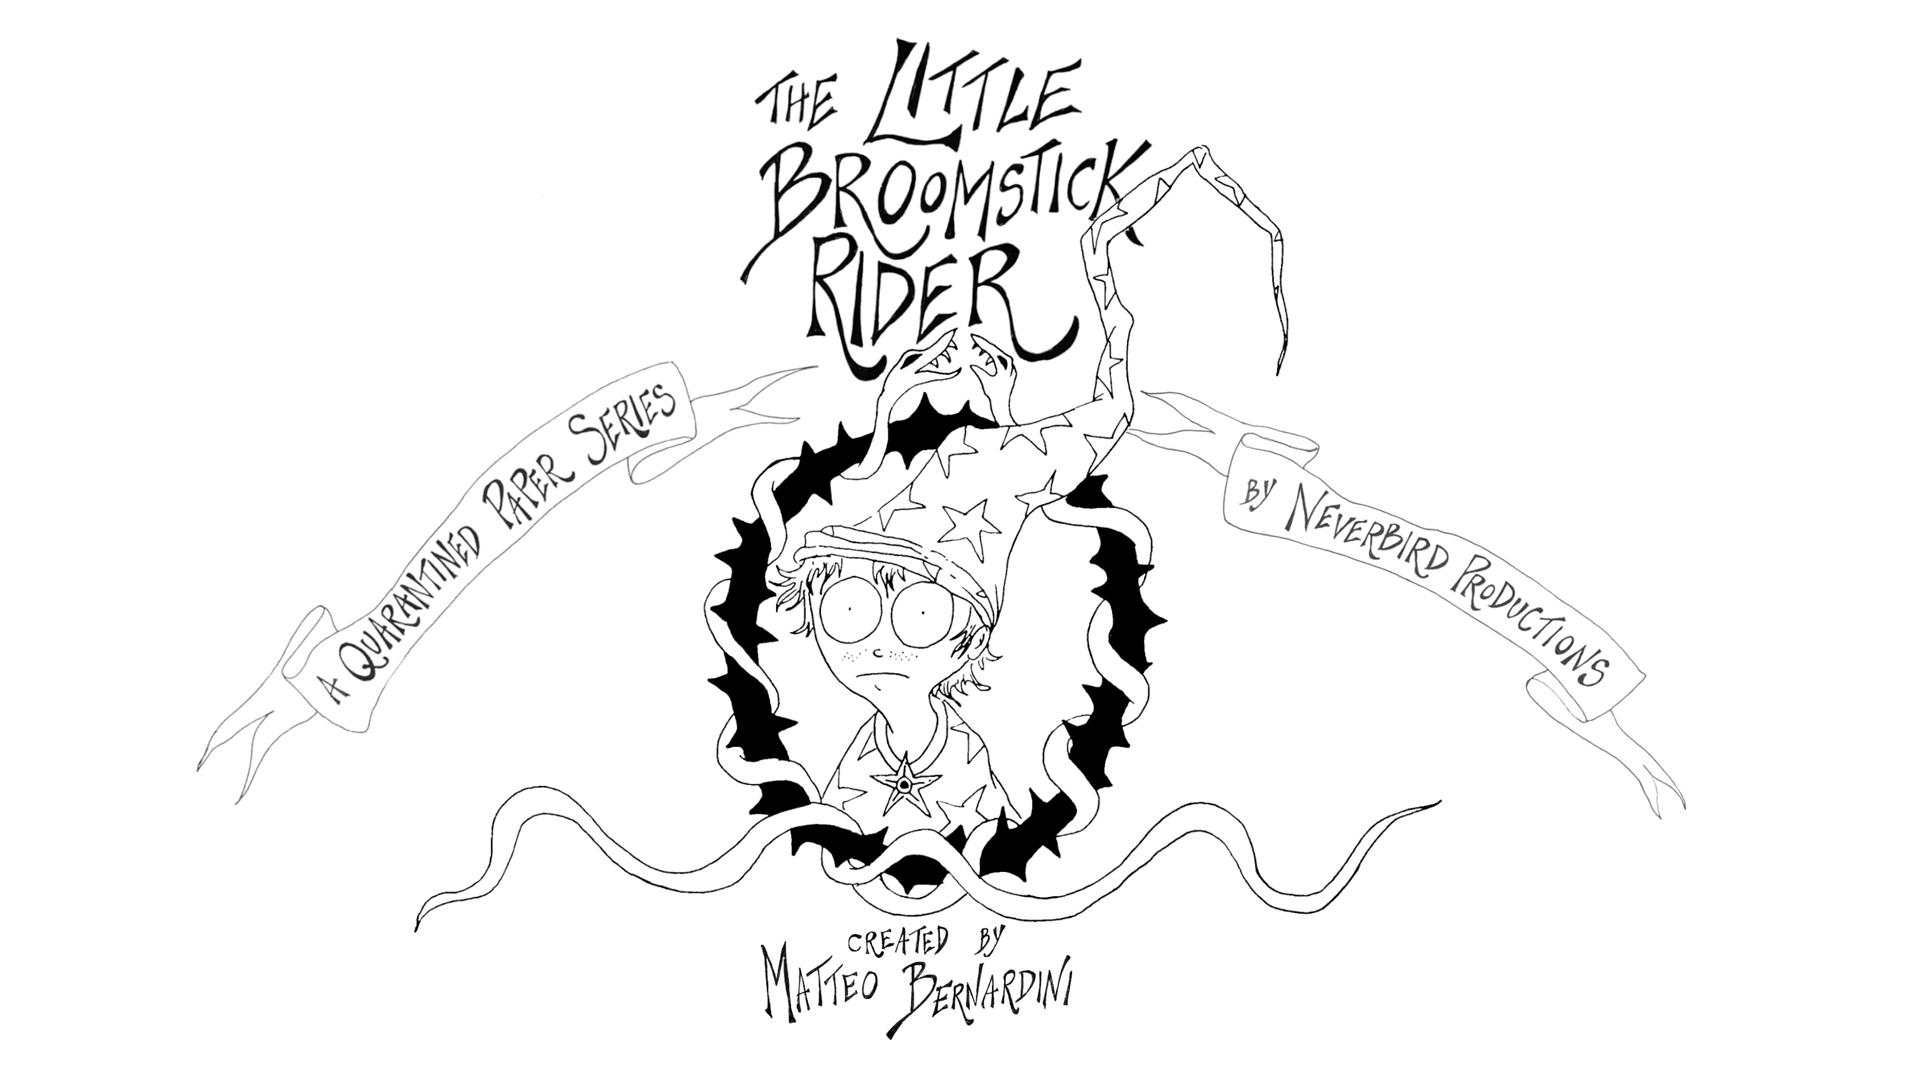 The Little Broomstick Rider